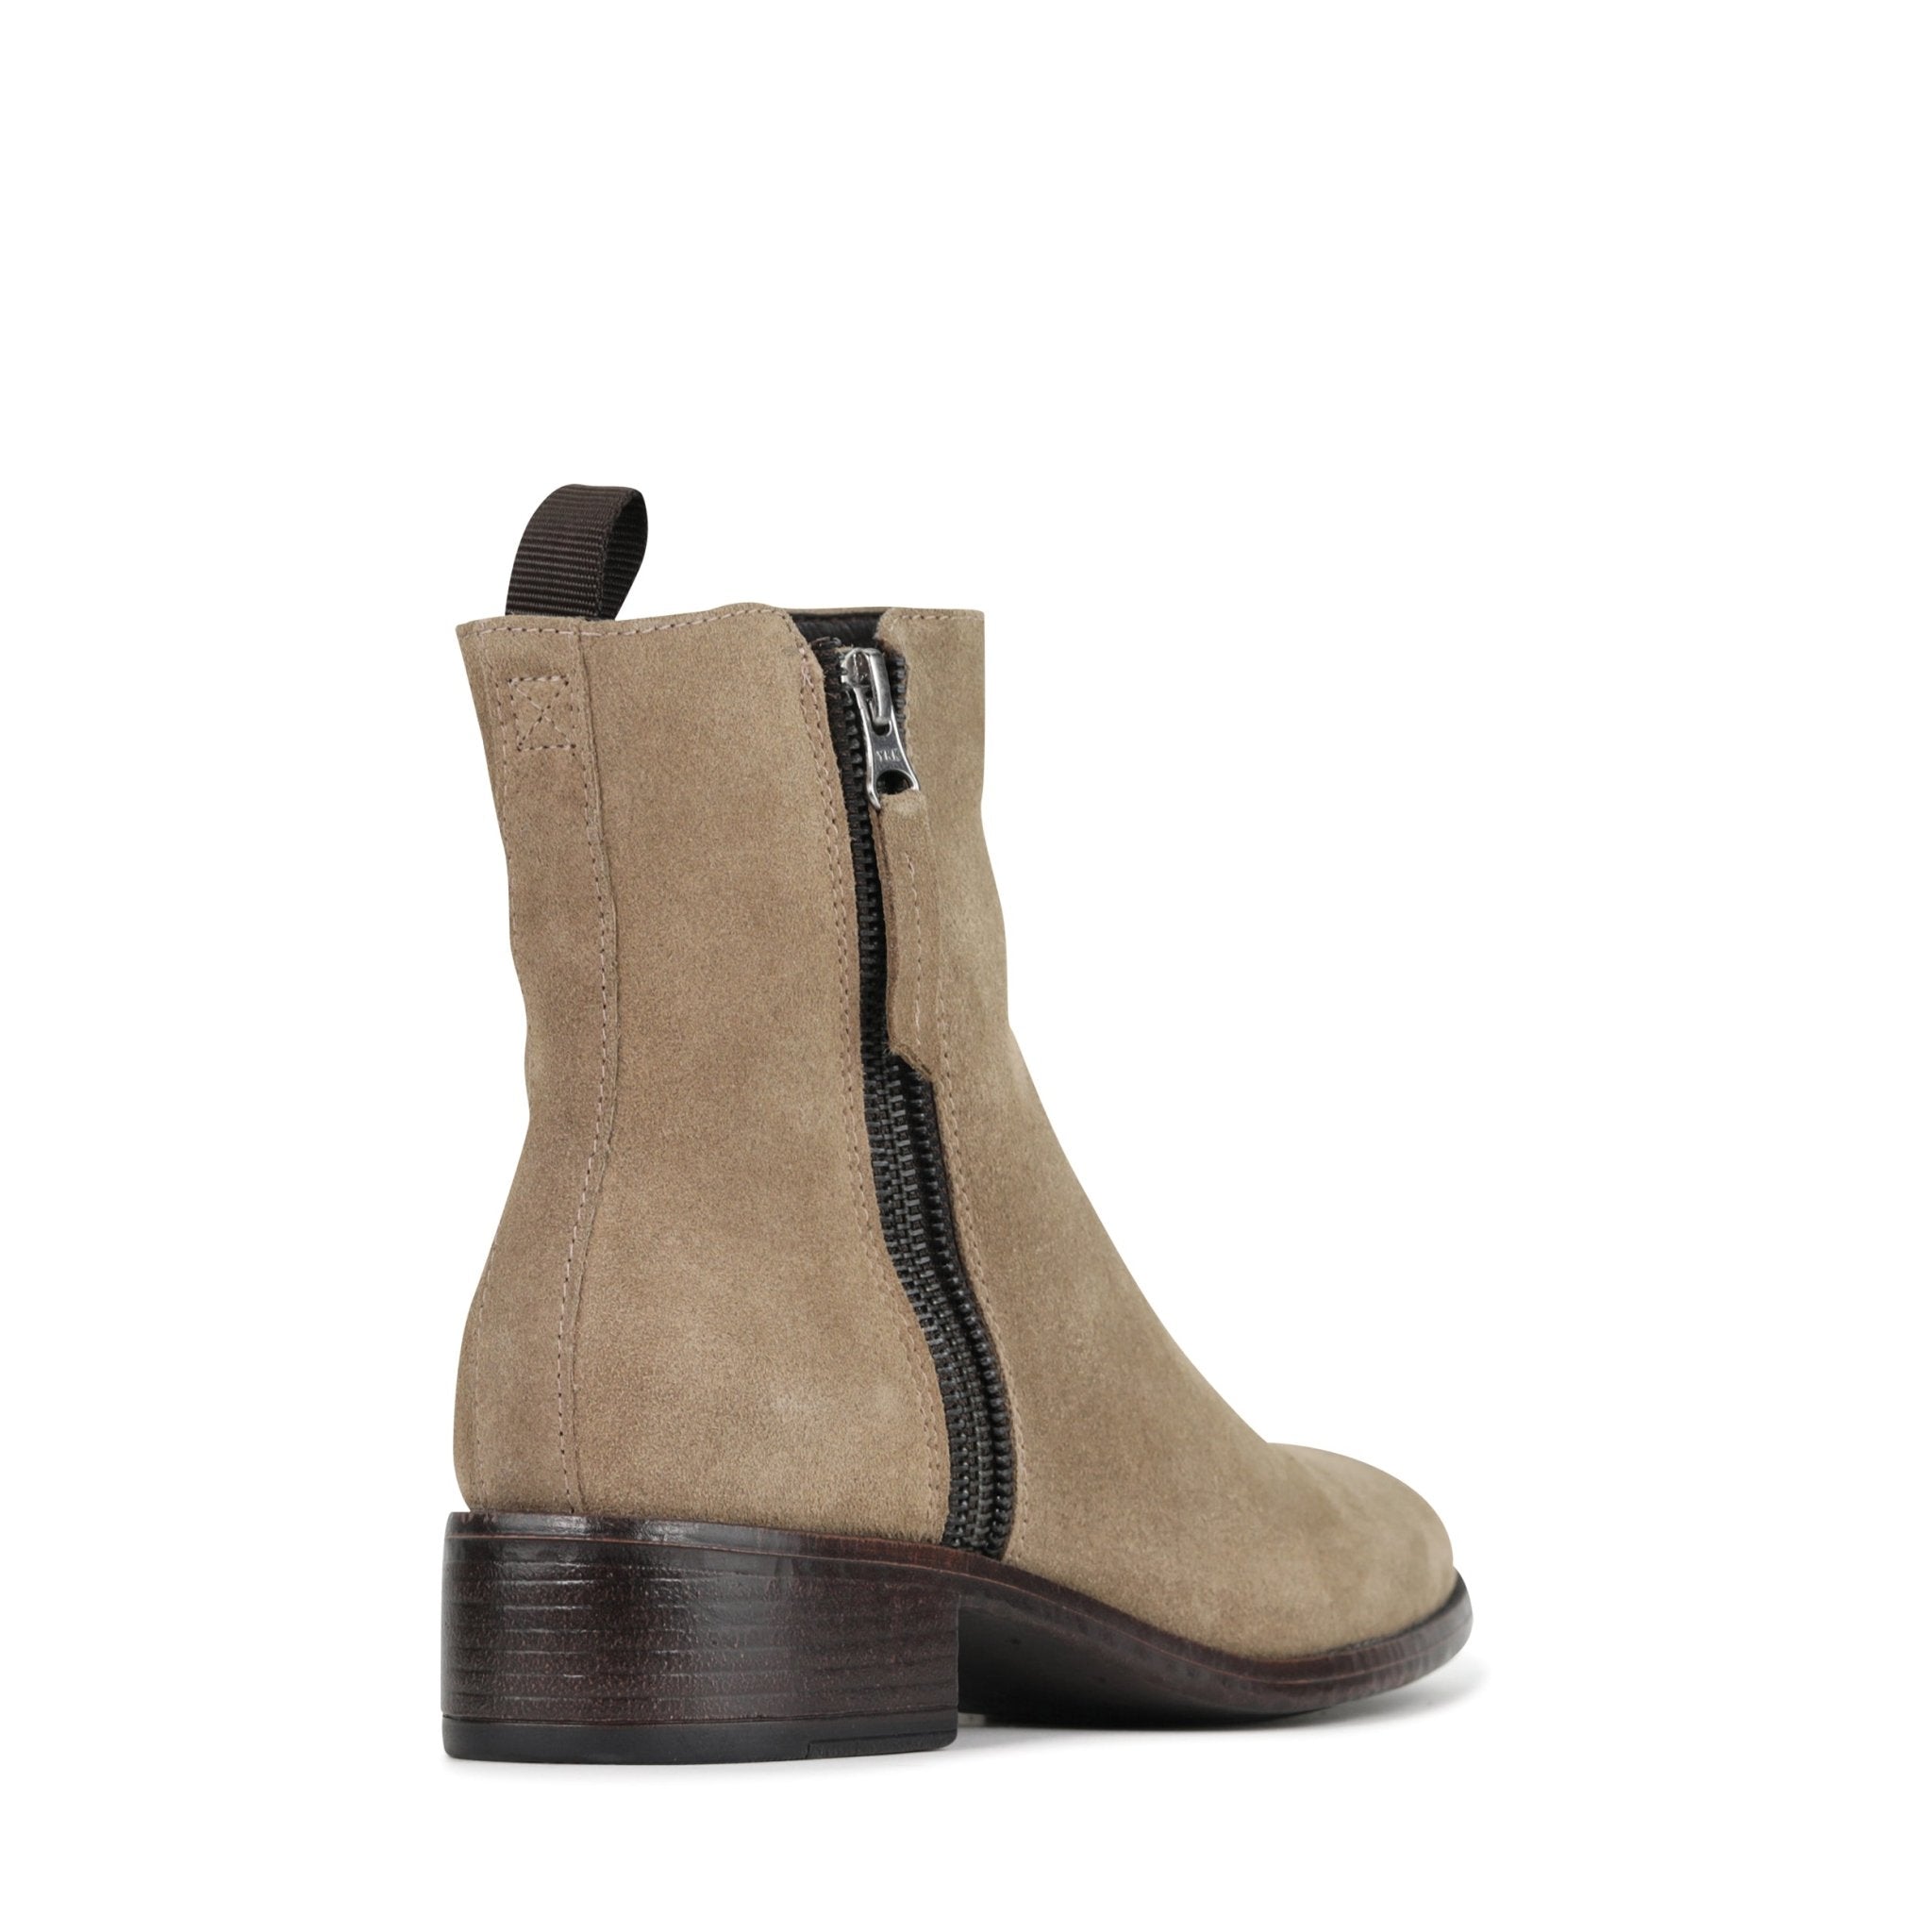 CELI - EOS Footwear - Ankle Boots #color_Taupe